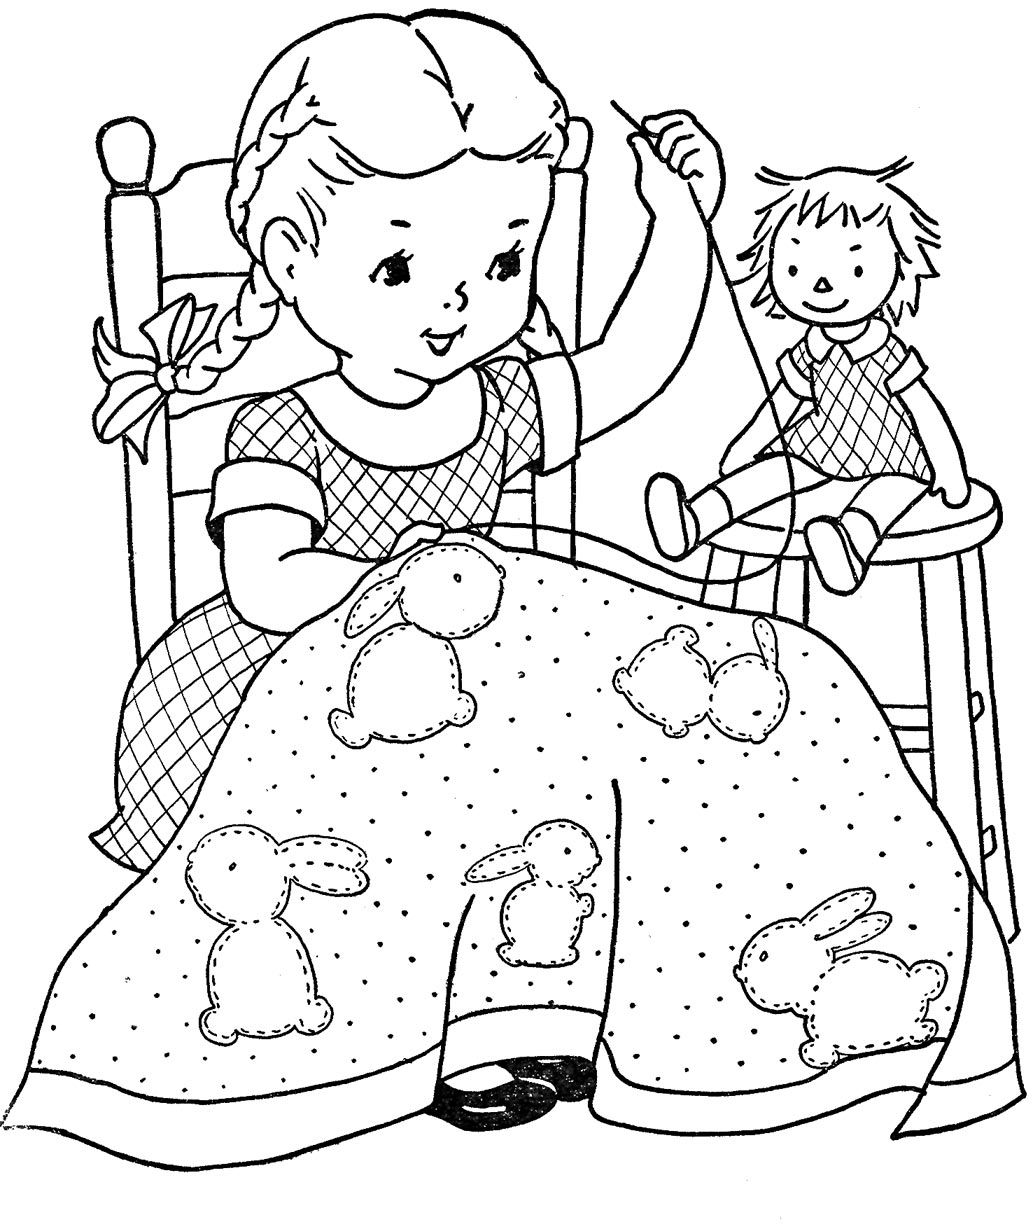 Sewing Coloring Pages At GetColorings Free Printable Colorings Pages To Print And Color